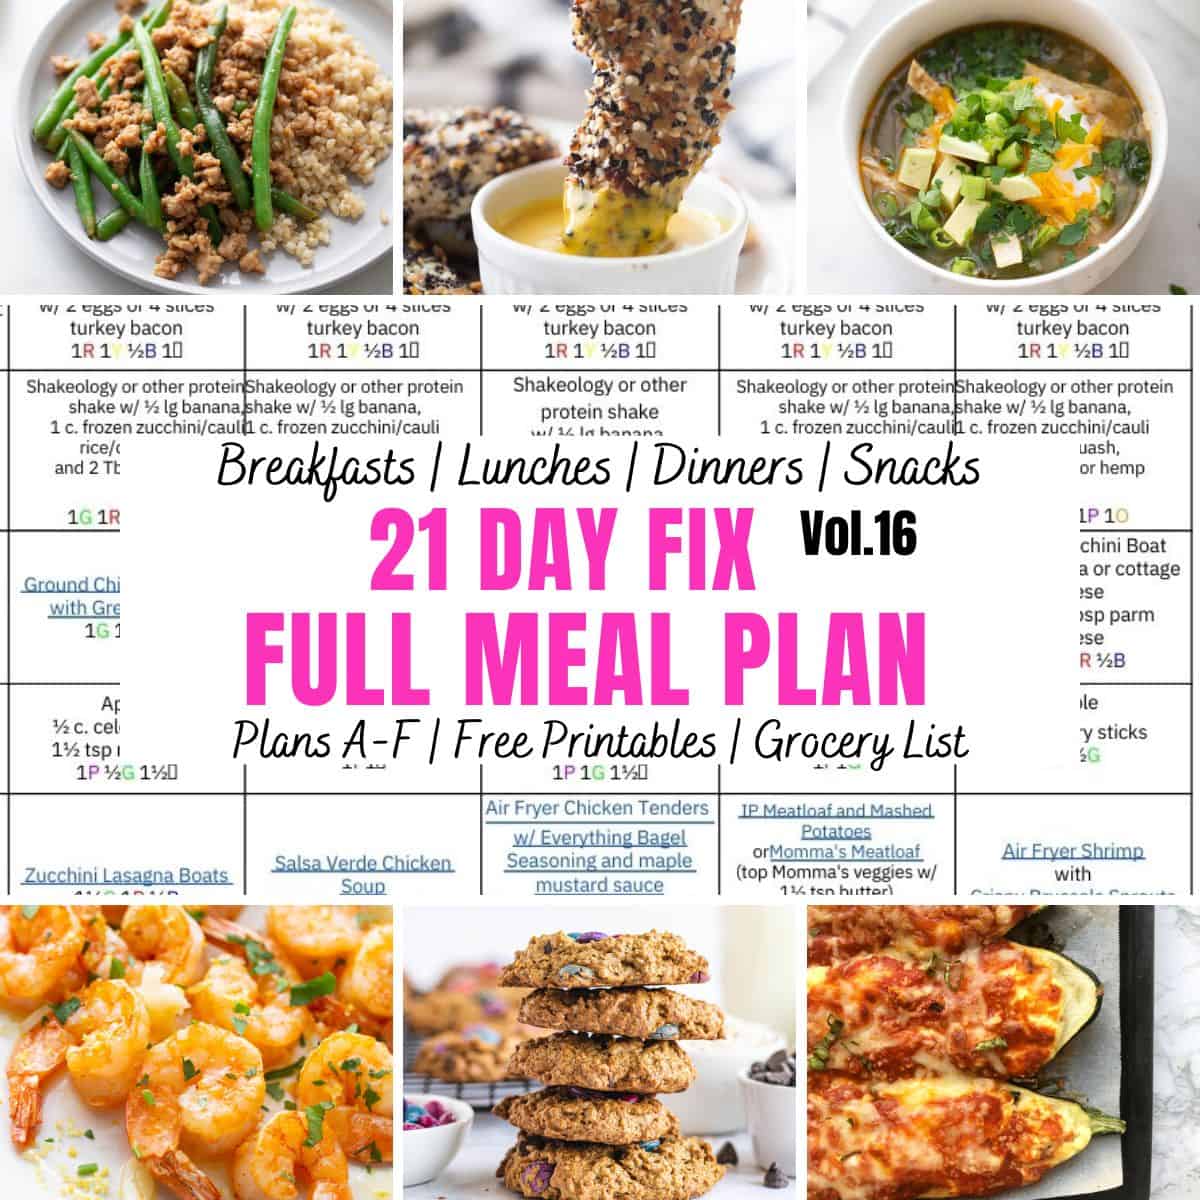 https://confessionsofafitfoodie.com/wp-content/uploads/2023/03/Full-Meal-plan-Vol-16.jpg